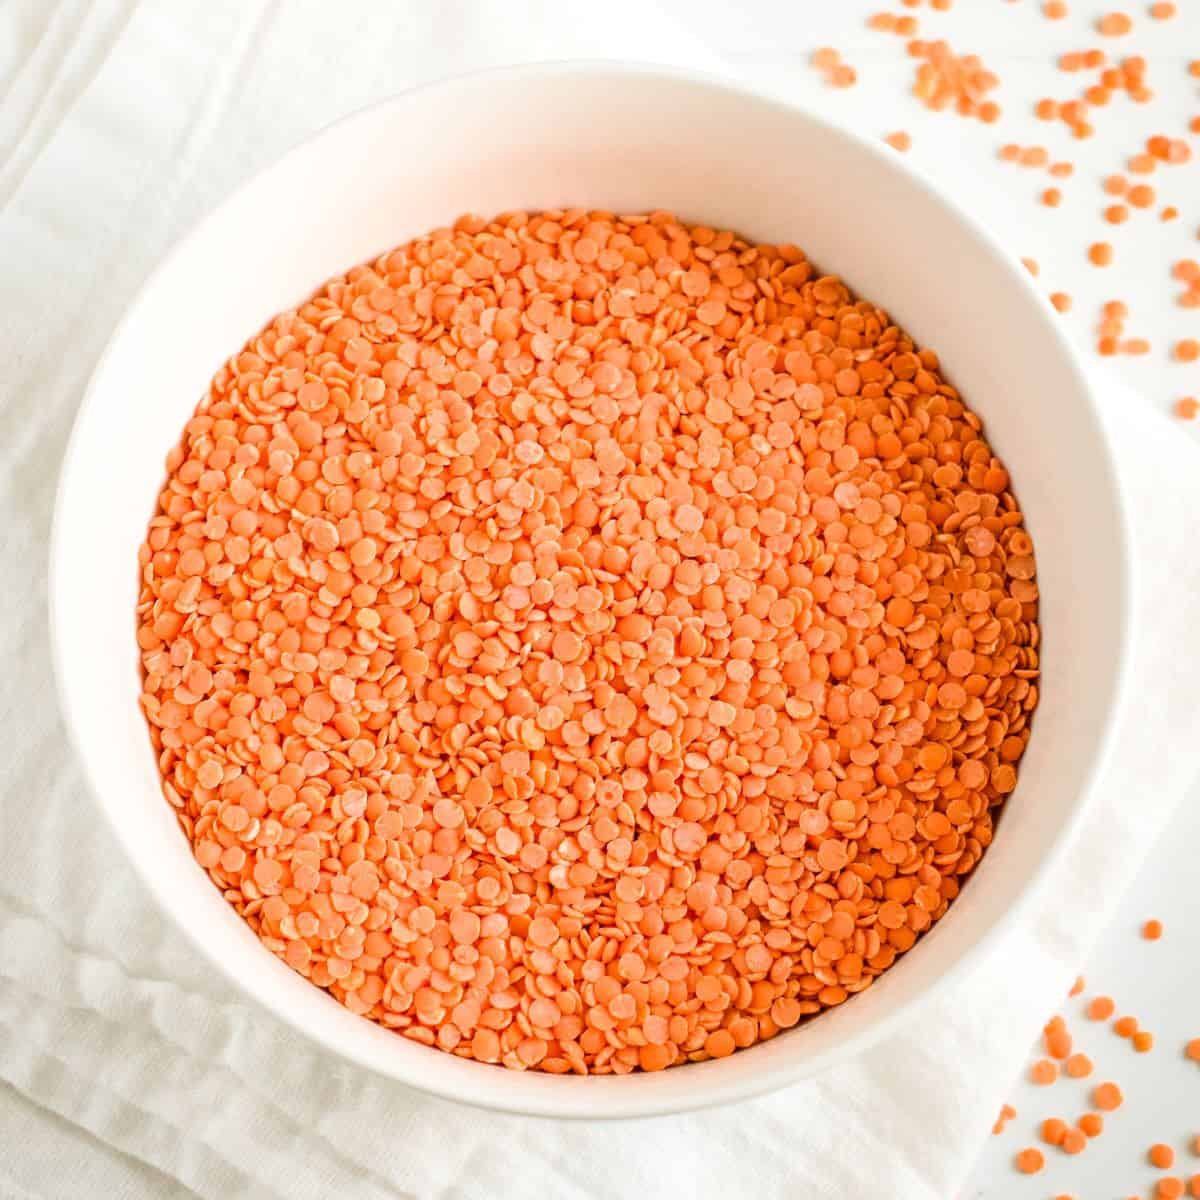 Lentils: Plant-Based Protein Power  - one of the 7 Power Foods to Supercharge Your Muscle Growth (Backed by Science)